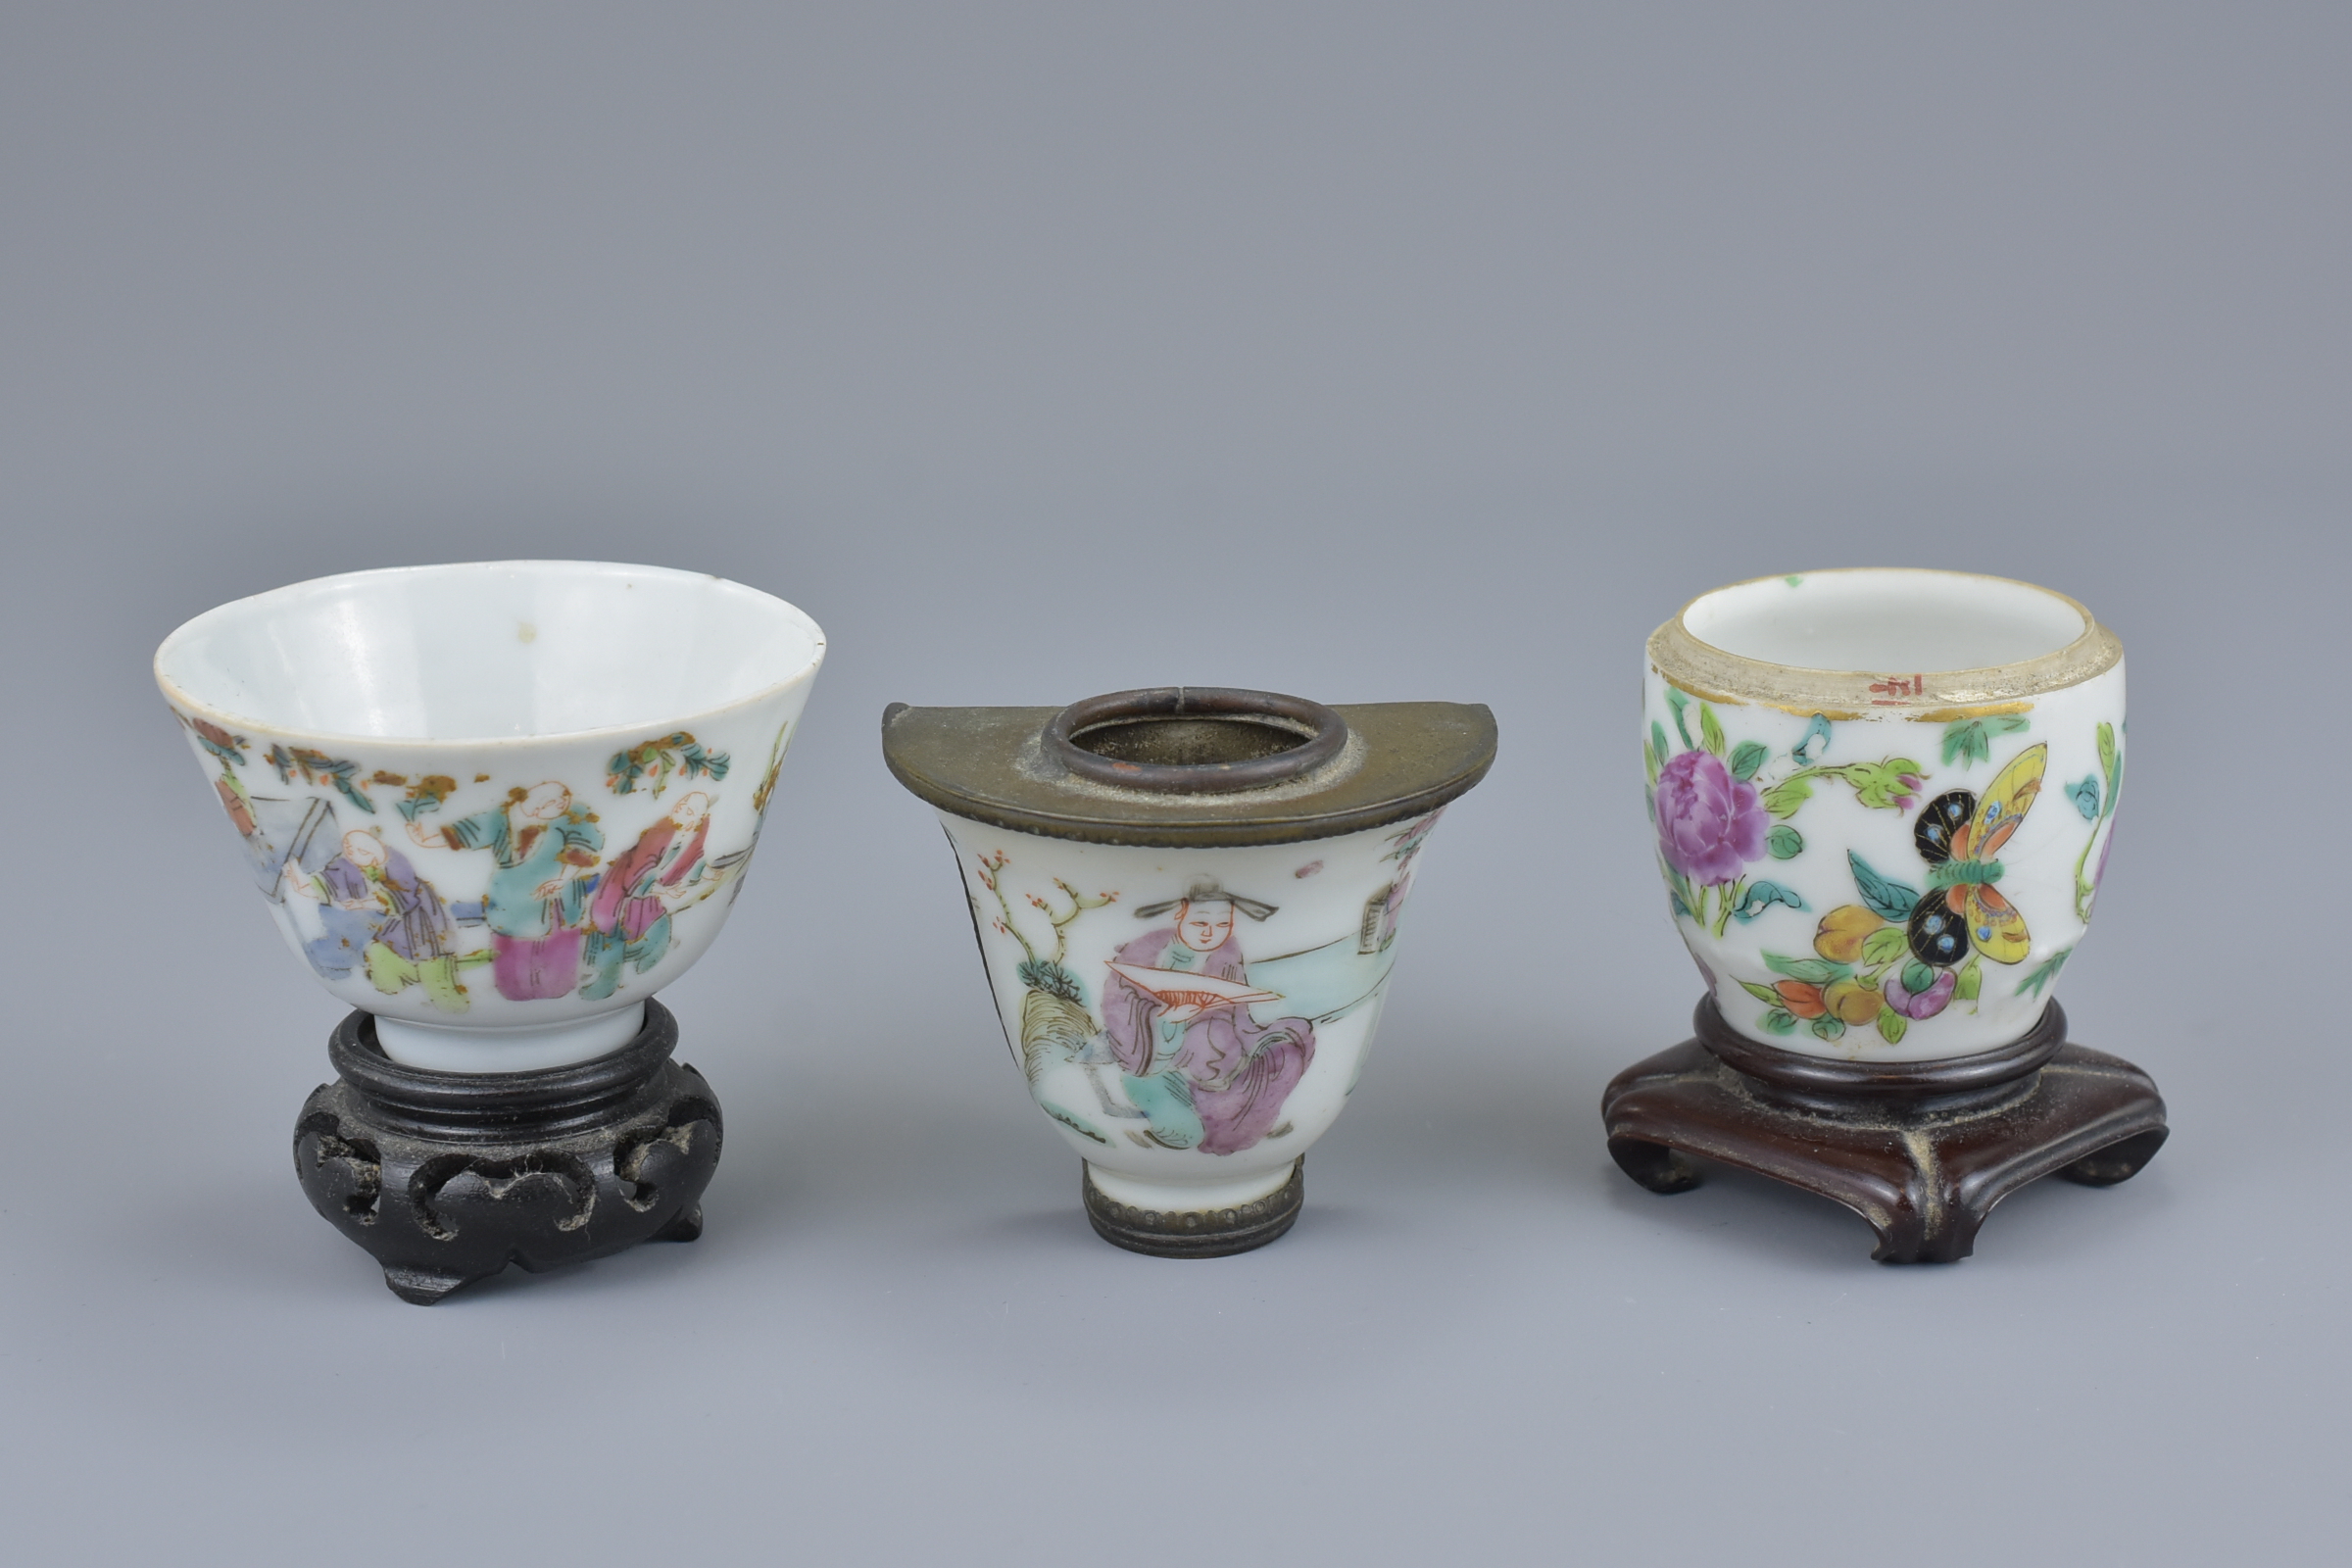 A group of seven Chinese 19th Century Famille Rose porcelain pots, ink pot, cup and bird feeder - Image 2 of 7